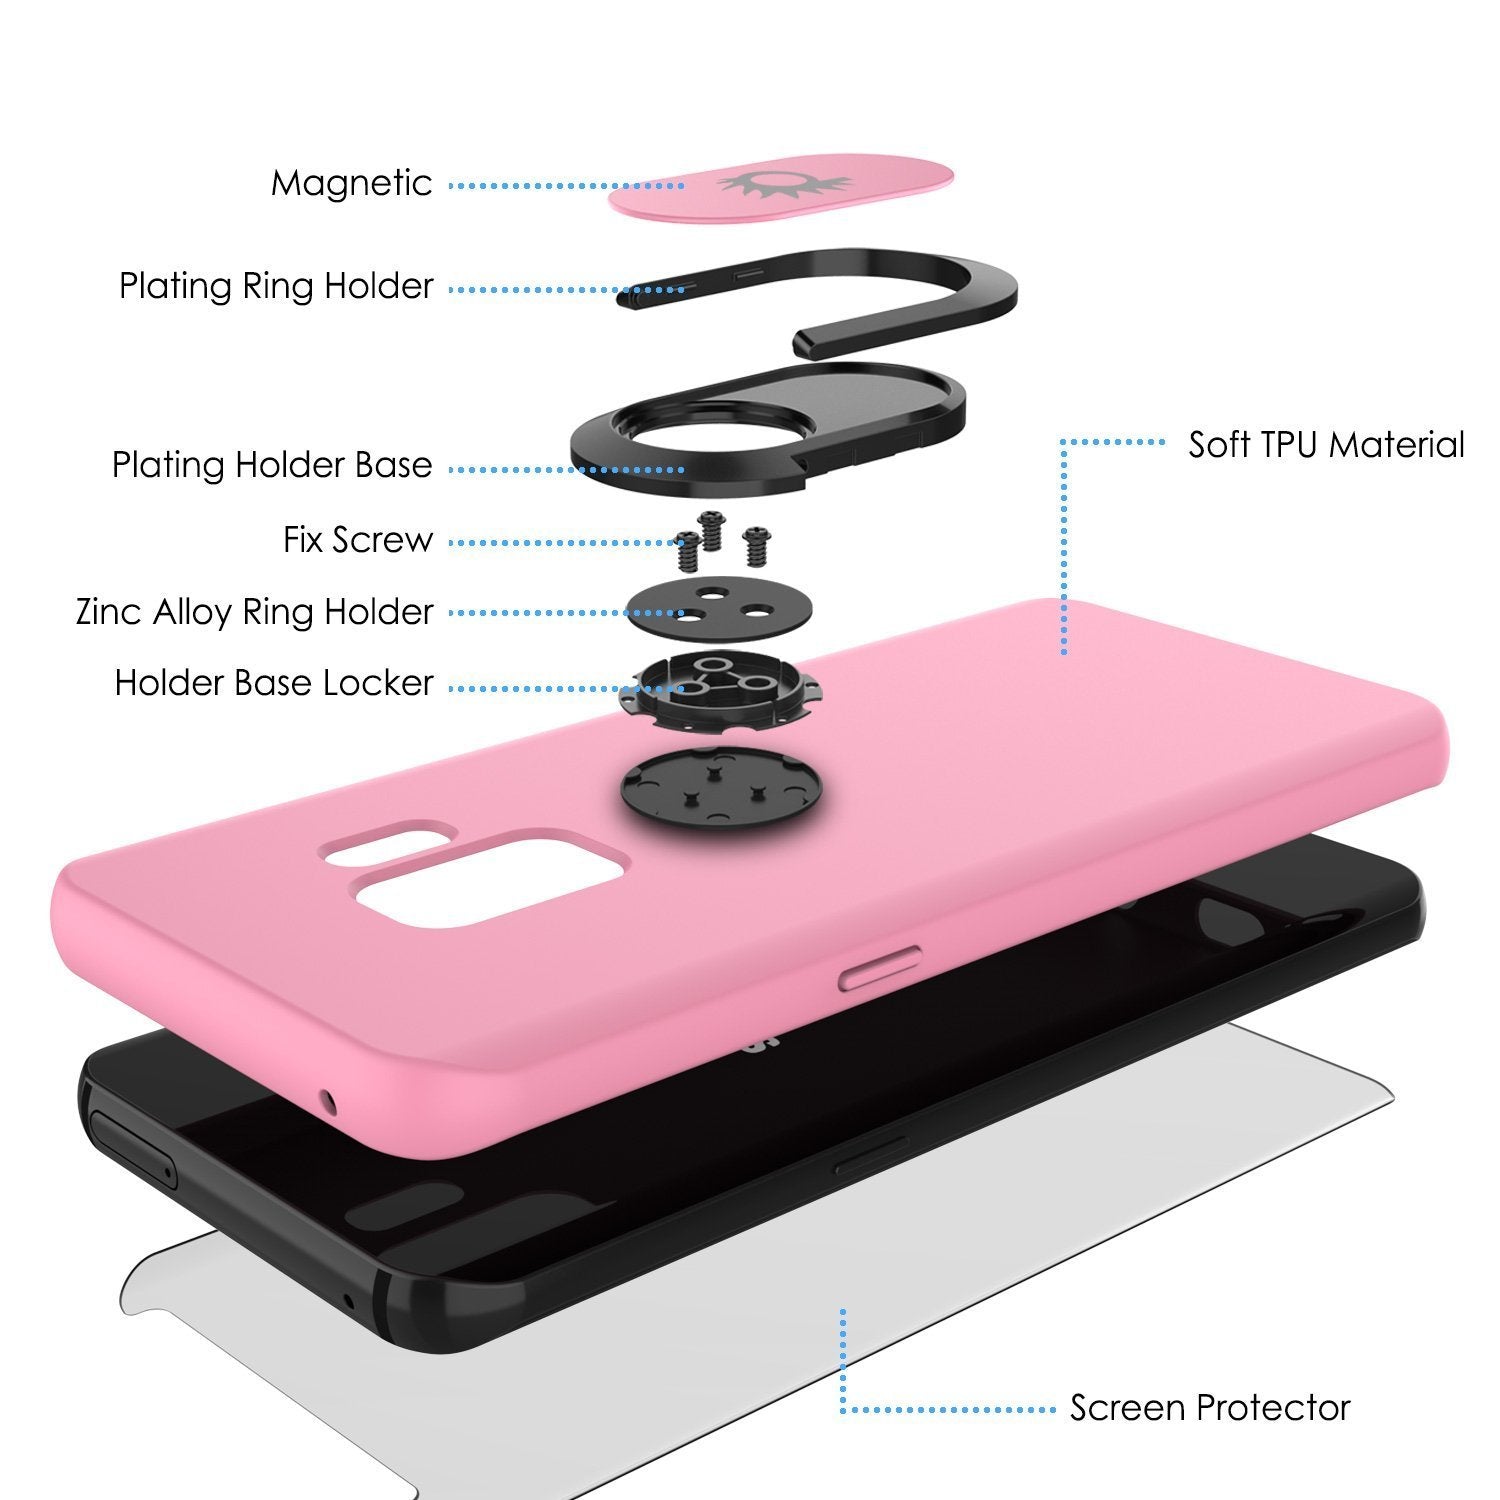 Galaxy S9 Case, Punkcase Magnetix Protective TPU Cover W/ Kickstand, Ring Grip Holder & Metal Plate for Magnetic Car Phone Mount PLUS PunkShield Screen Protector for Samsung S9 Edge [Pink]